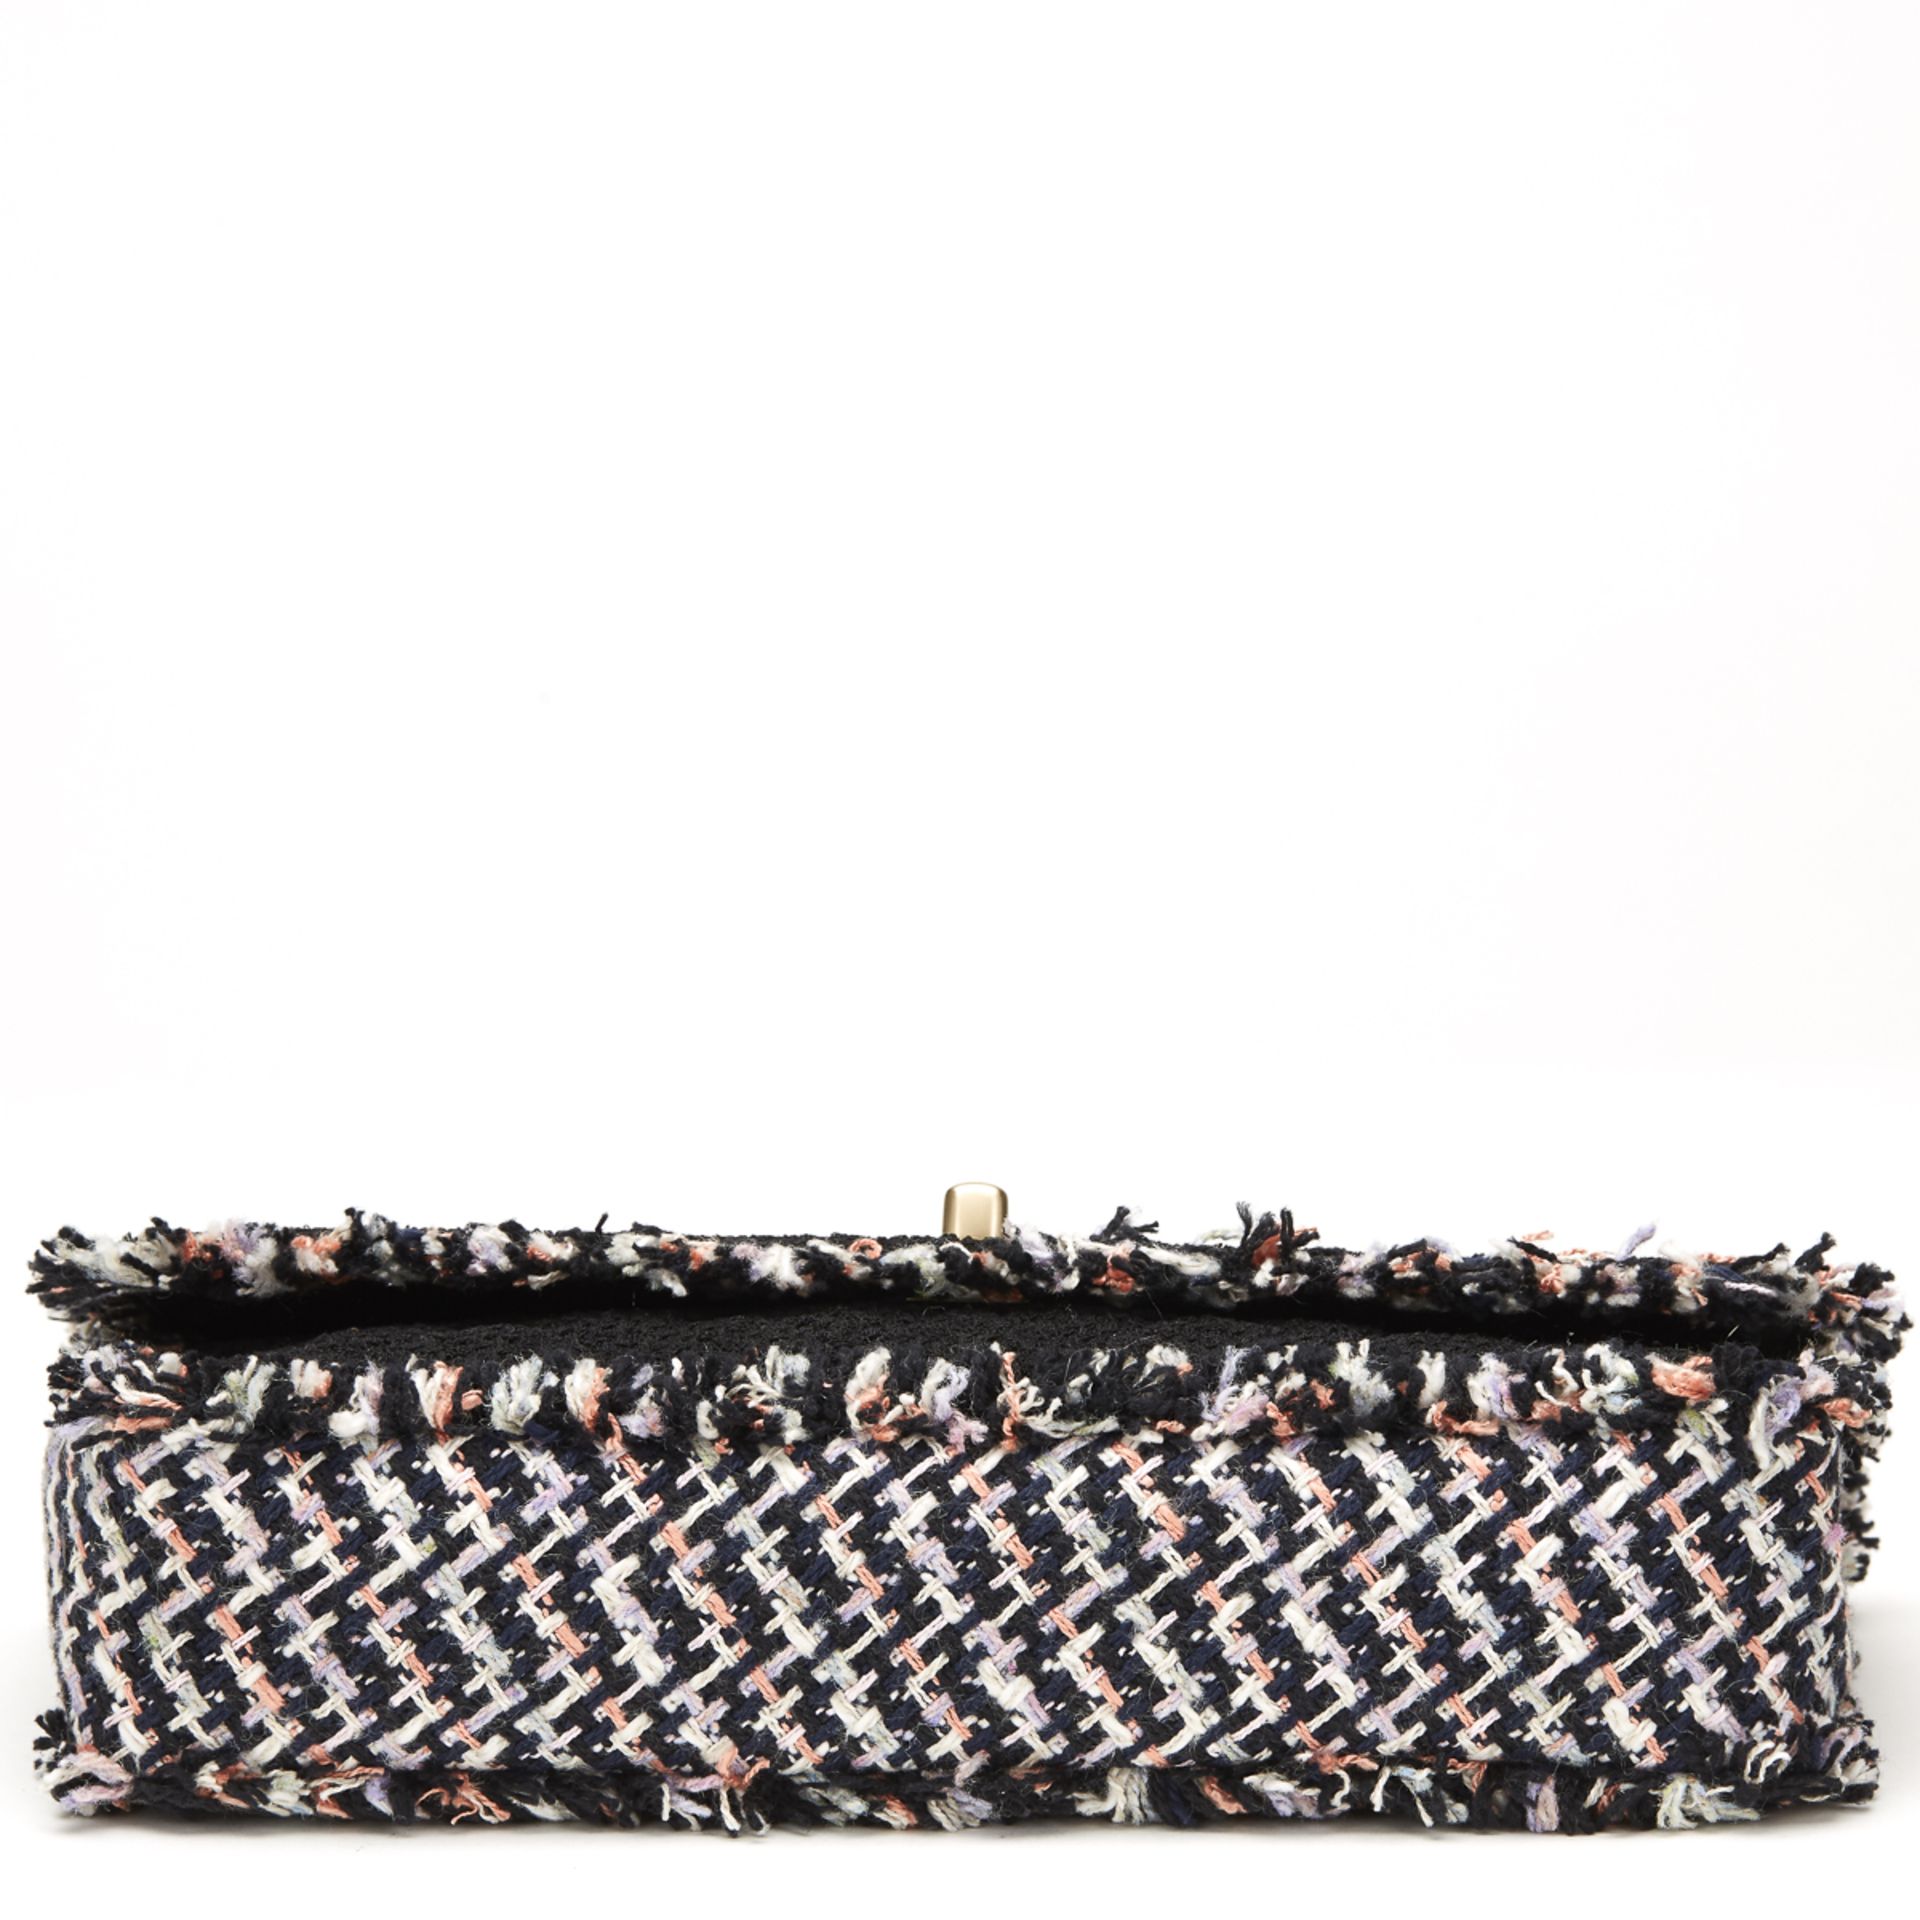 Chanel Black & Multicolour Tweed Fabric East West Classic Single Flap Bag - Image 5 of 10